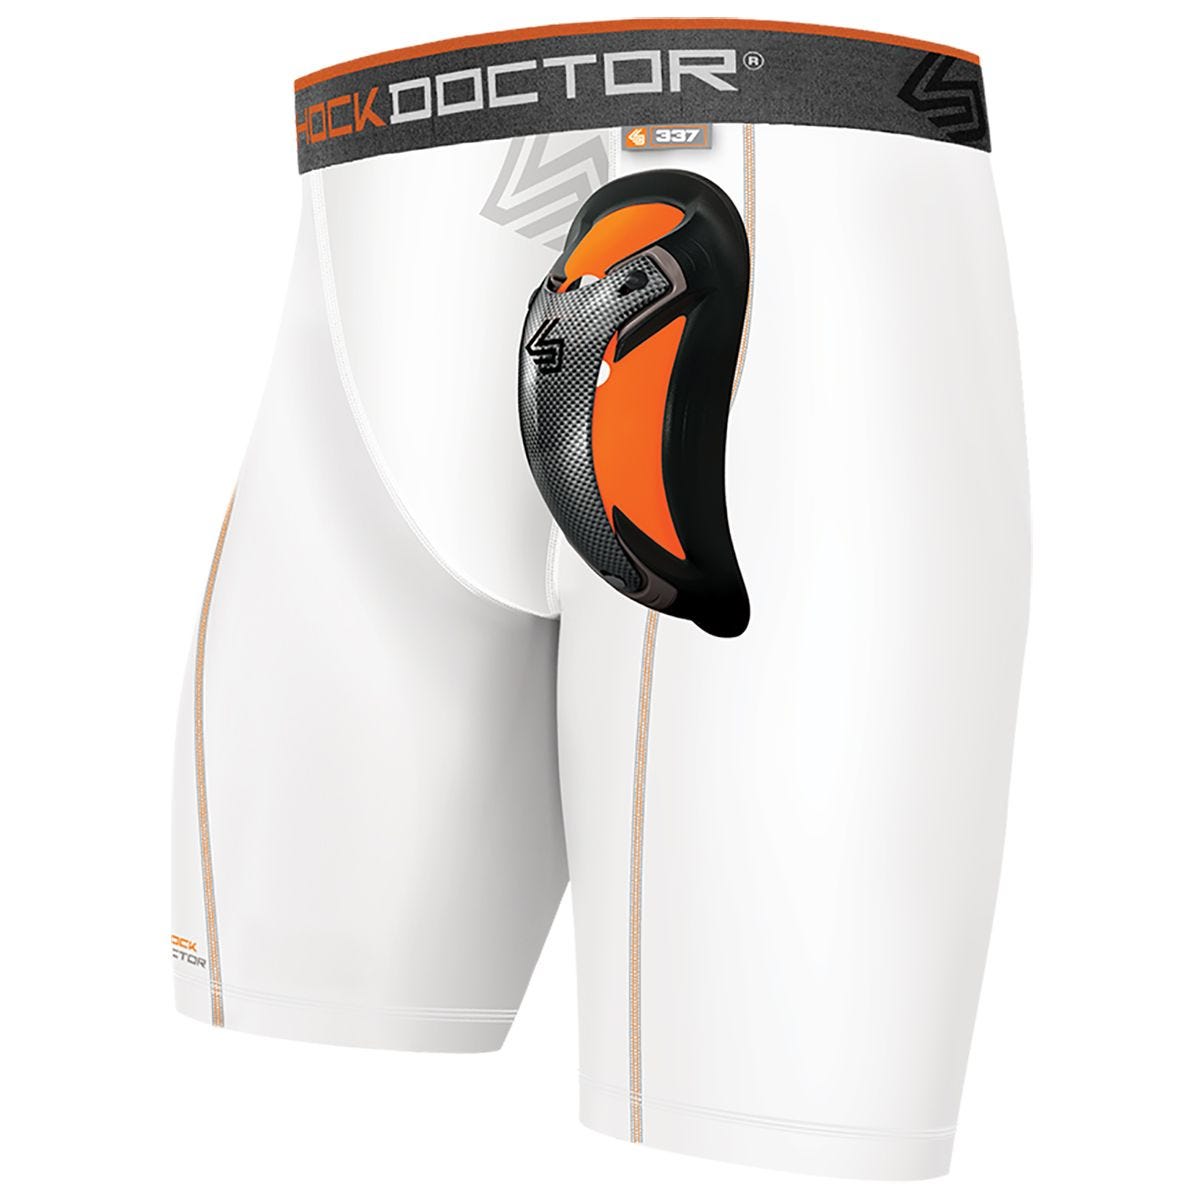 Shock Doctor Ultra Pro Carbon Flex Athletic Cup for Sports, Protective Cup  for Baseball & Contact Sports, Youth & Adult sizes, Includes 1 Cup